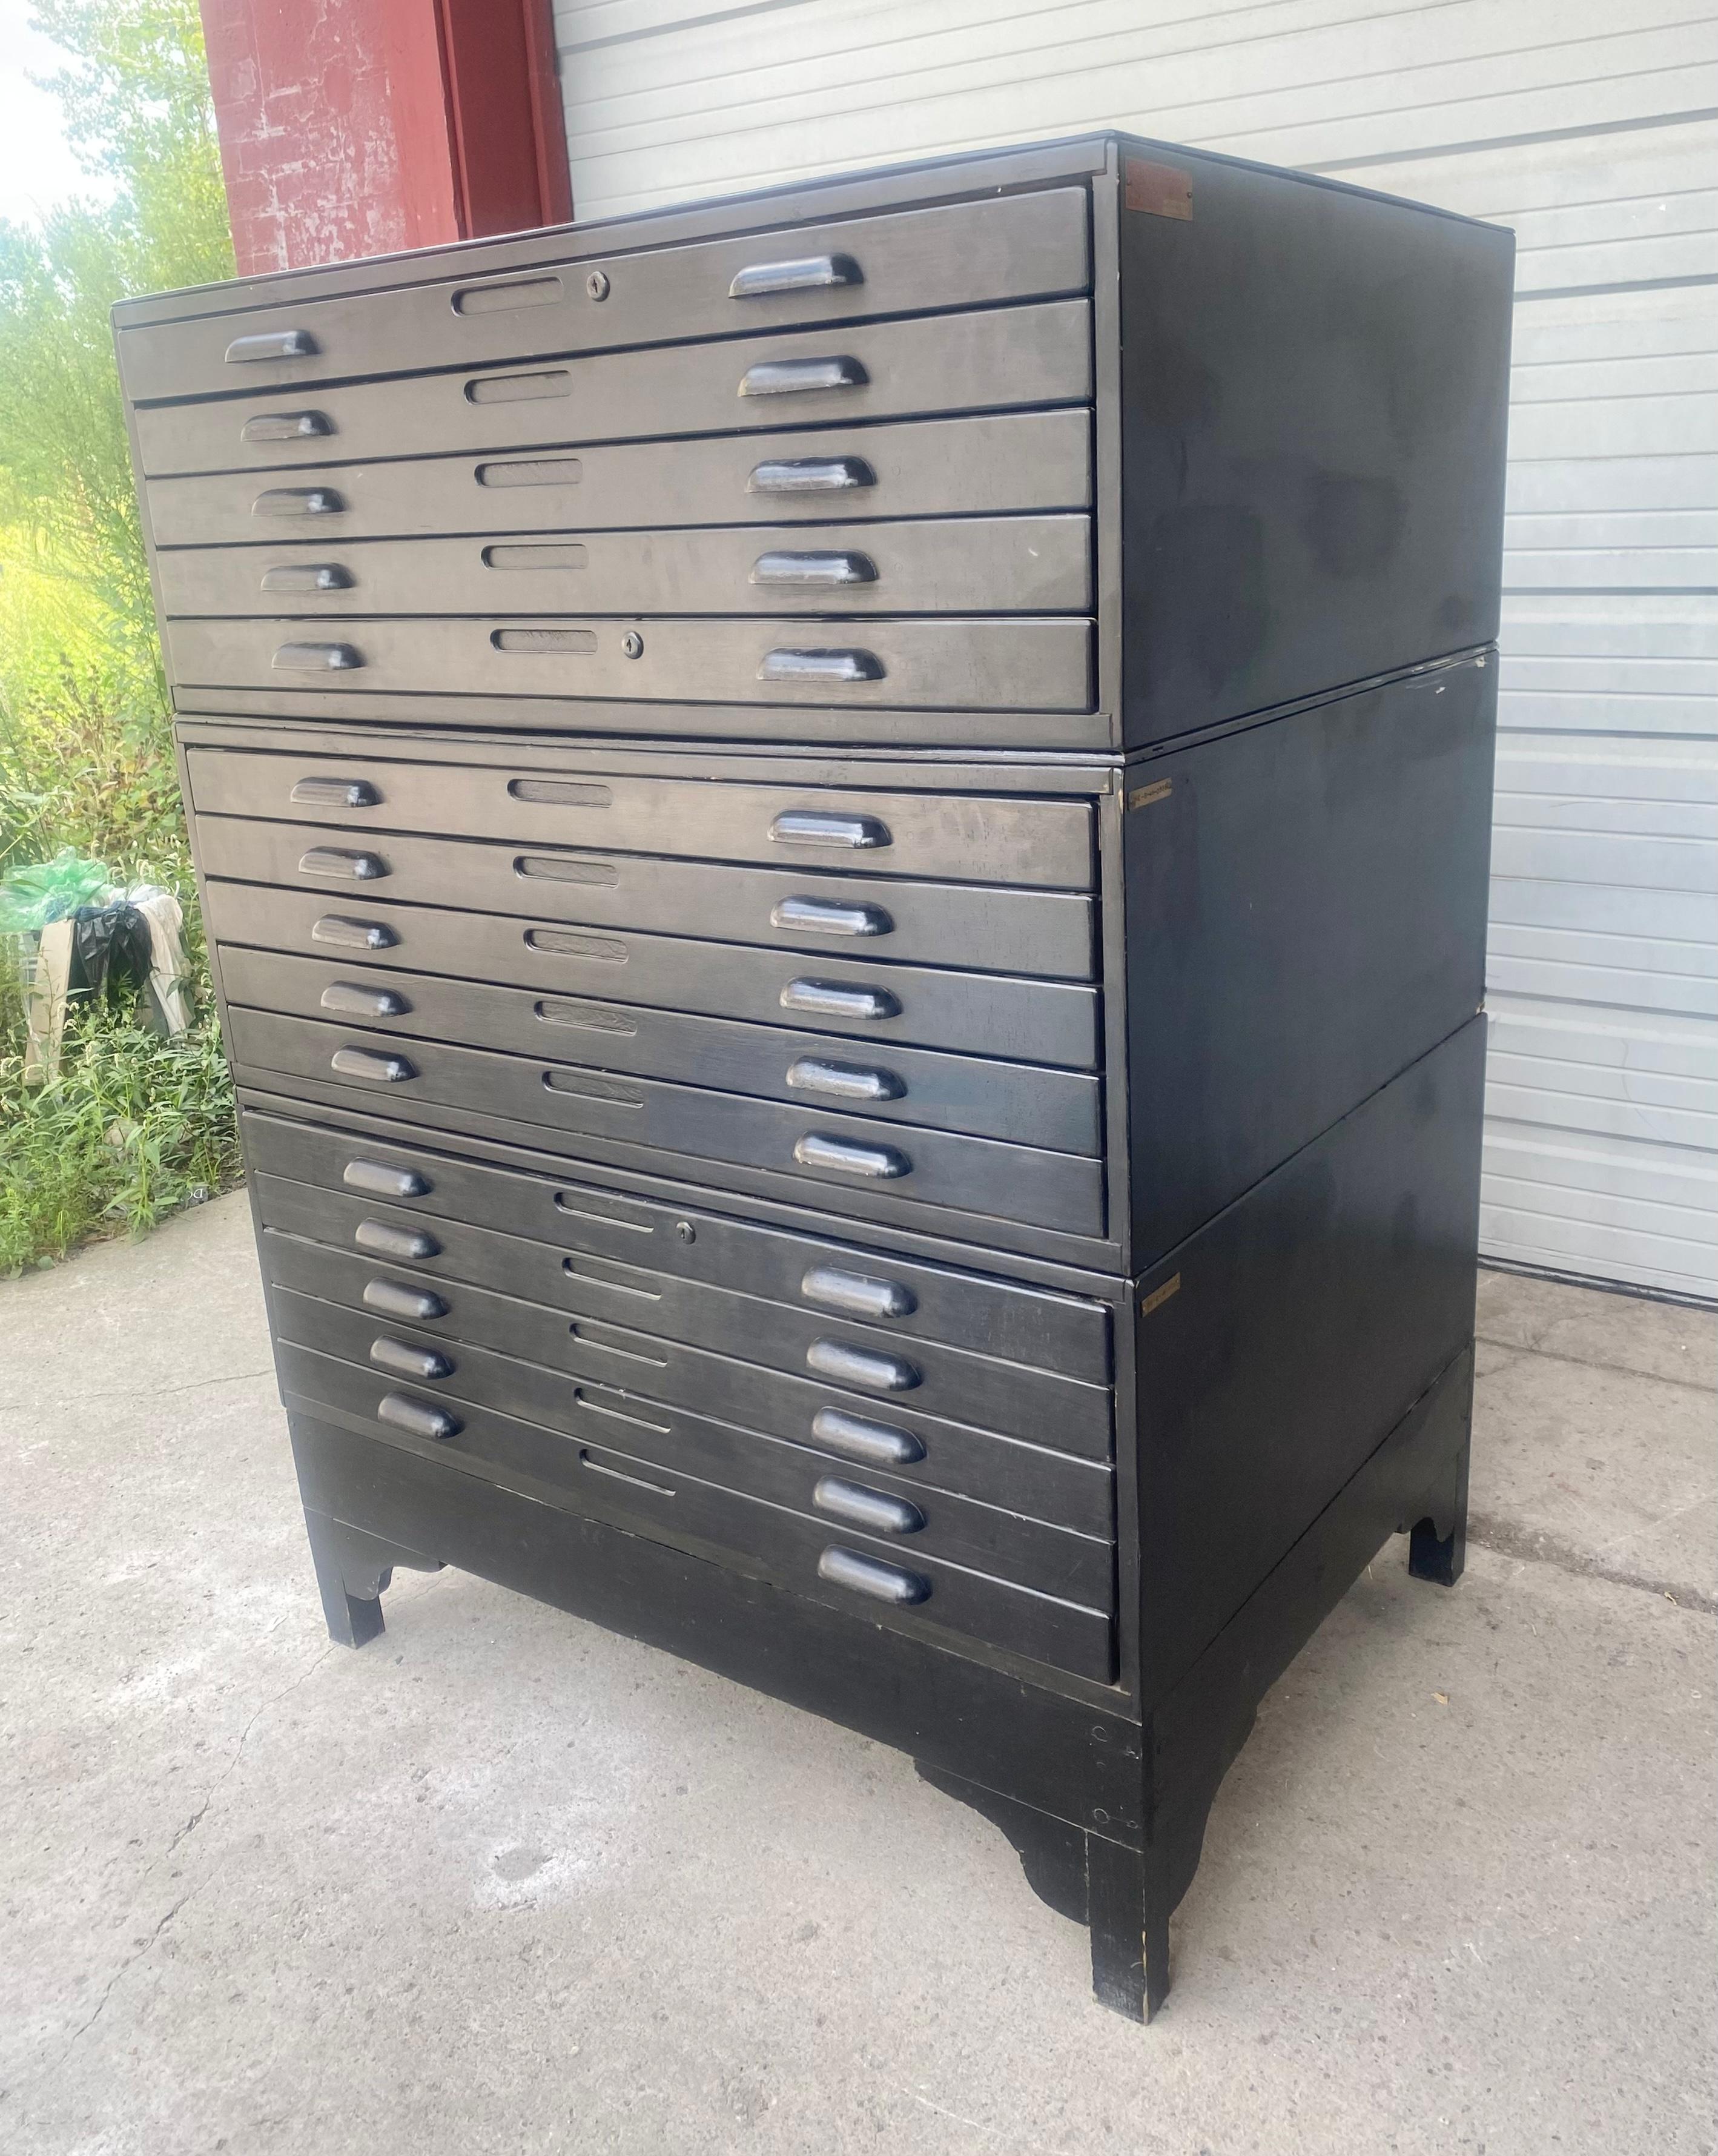 Antique Hamilton 15 drawer Stacking Flat File..Wonderful architectural design..3 separate sections and a base.painted black,, Fit seamlessly into any environment,, Hand delivery avail to NYC or anywhere en route from Buffalo NY